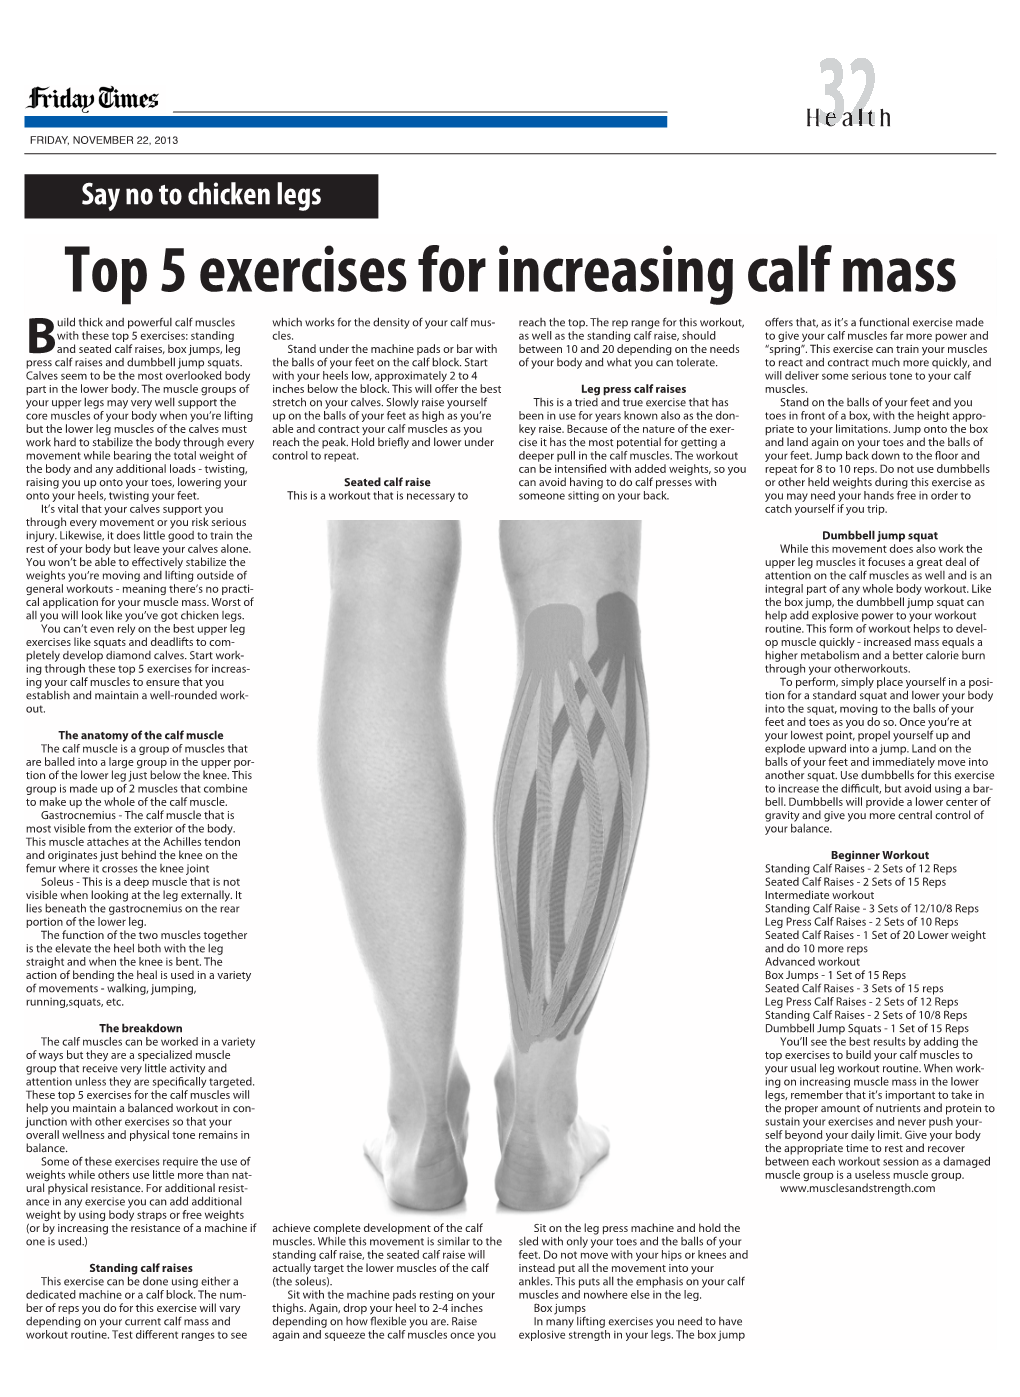 Top 5 Exercises for Increasing Calf Mass Uild Thick and Powerful Calf Muscles Which Works for the Density of Your Calf Mus- Reach the Top